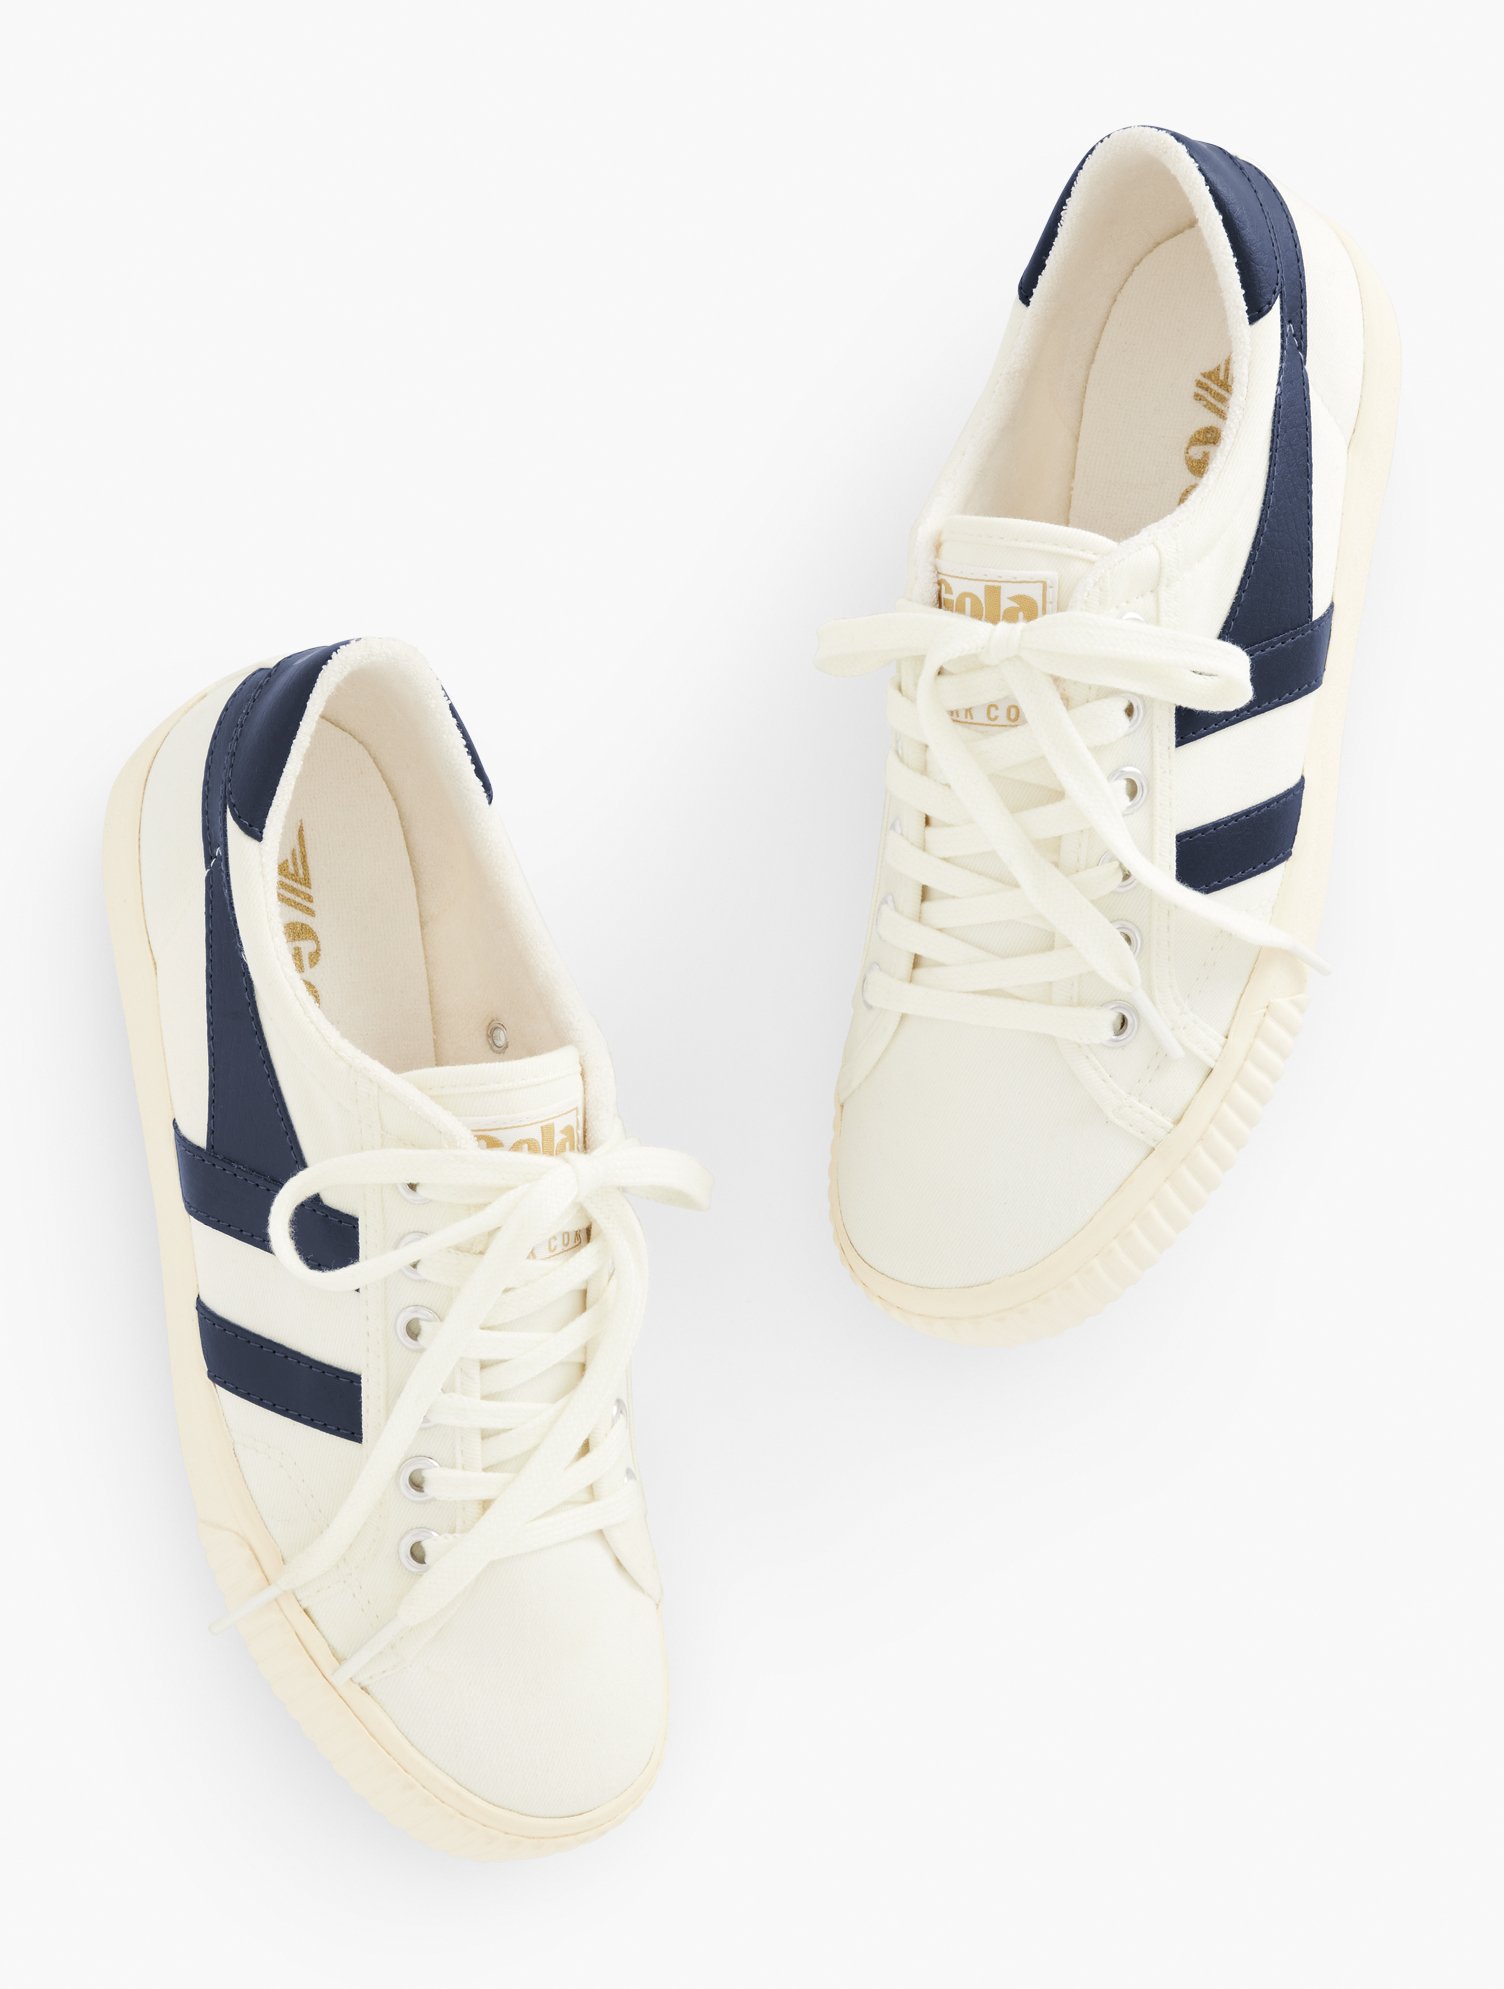 Talbots Golaâ® Mark Cox Tennis Sneakers - Off White/navy Blue - 9 1/2 M - 100% Cotton  In Off White,navy Blue